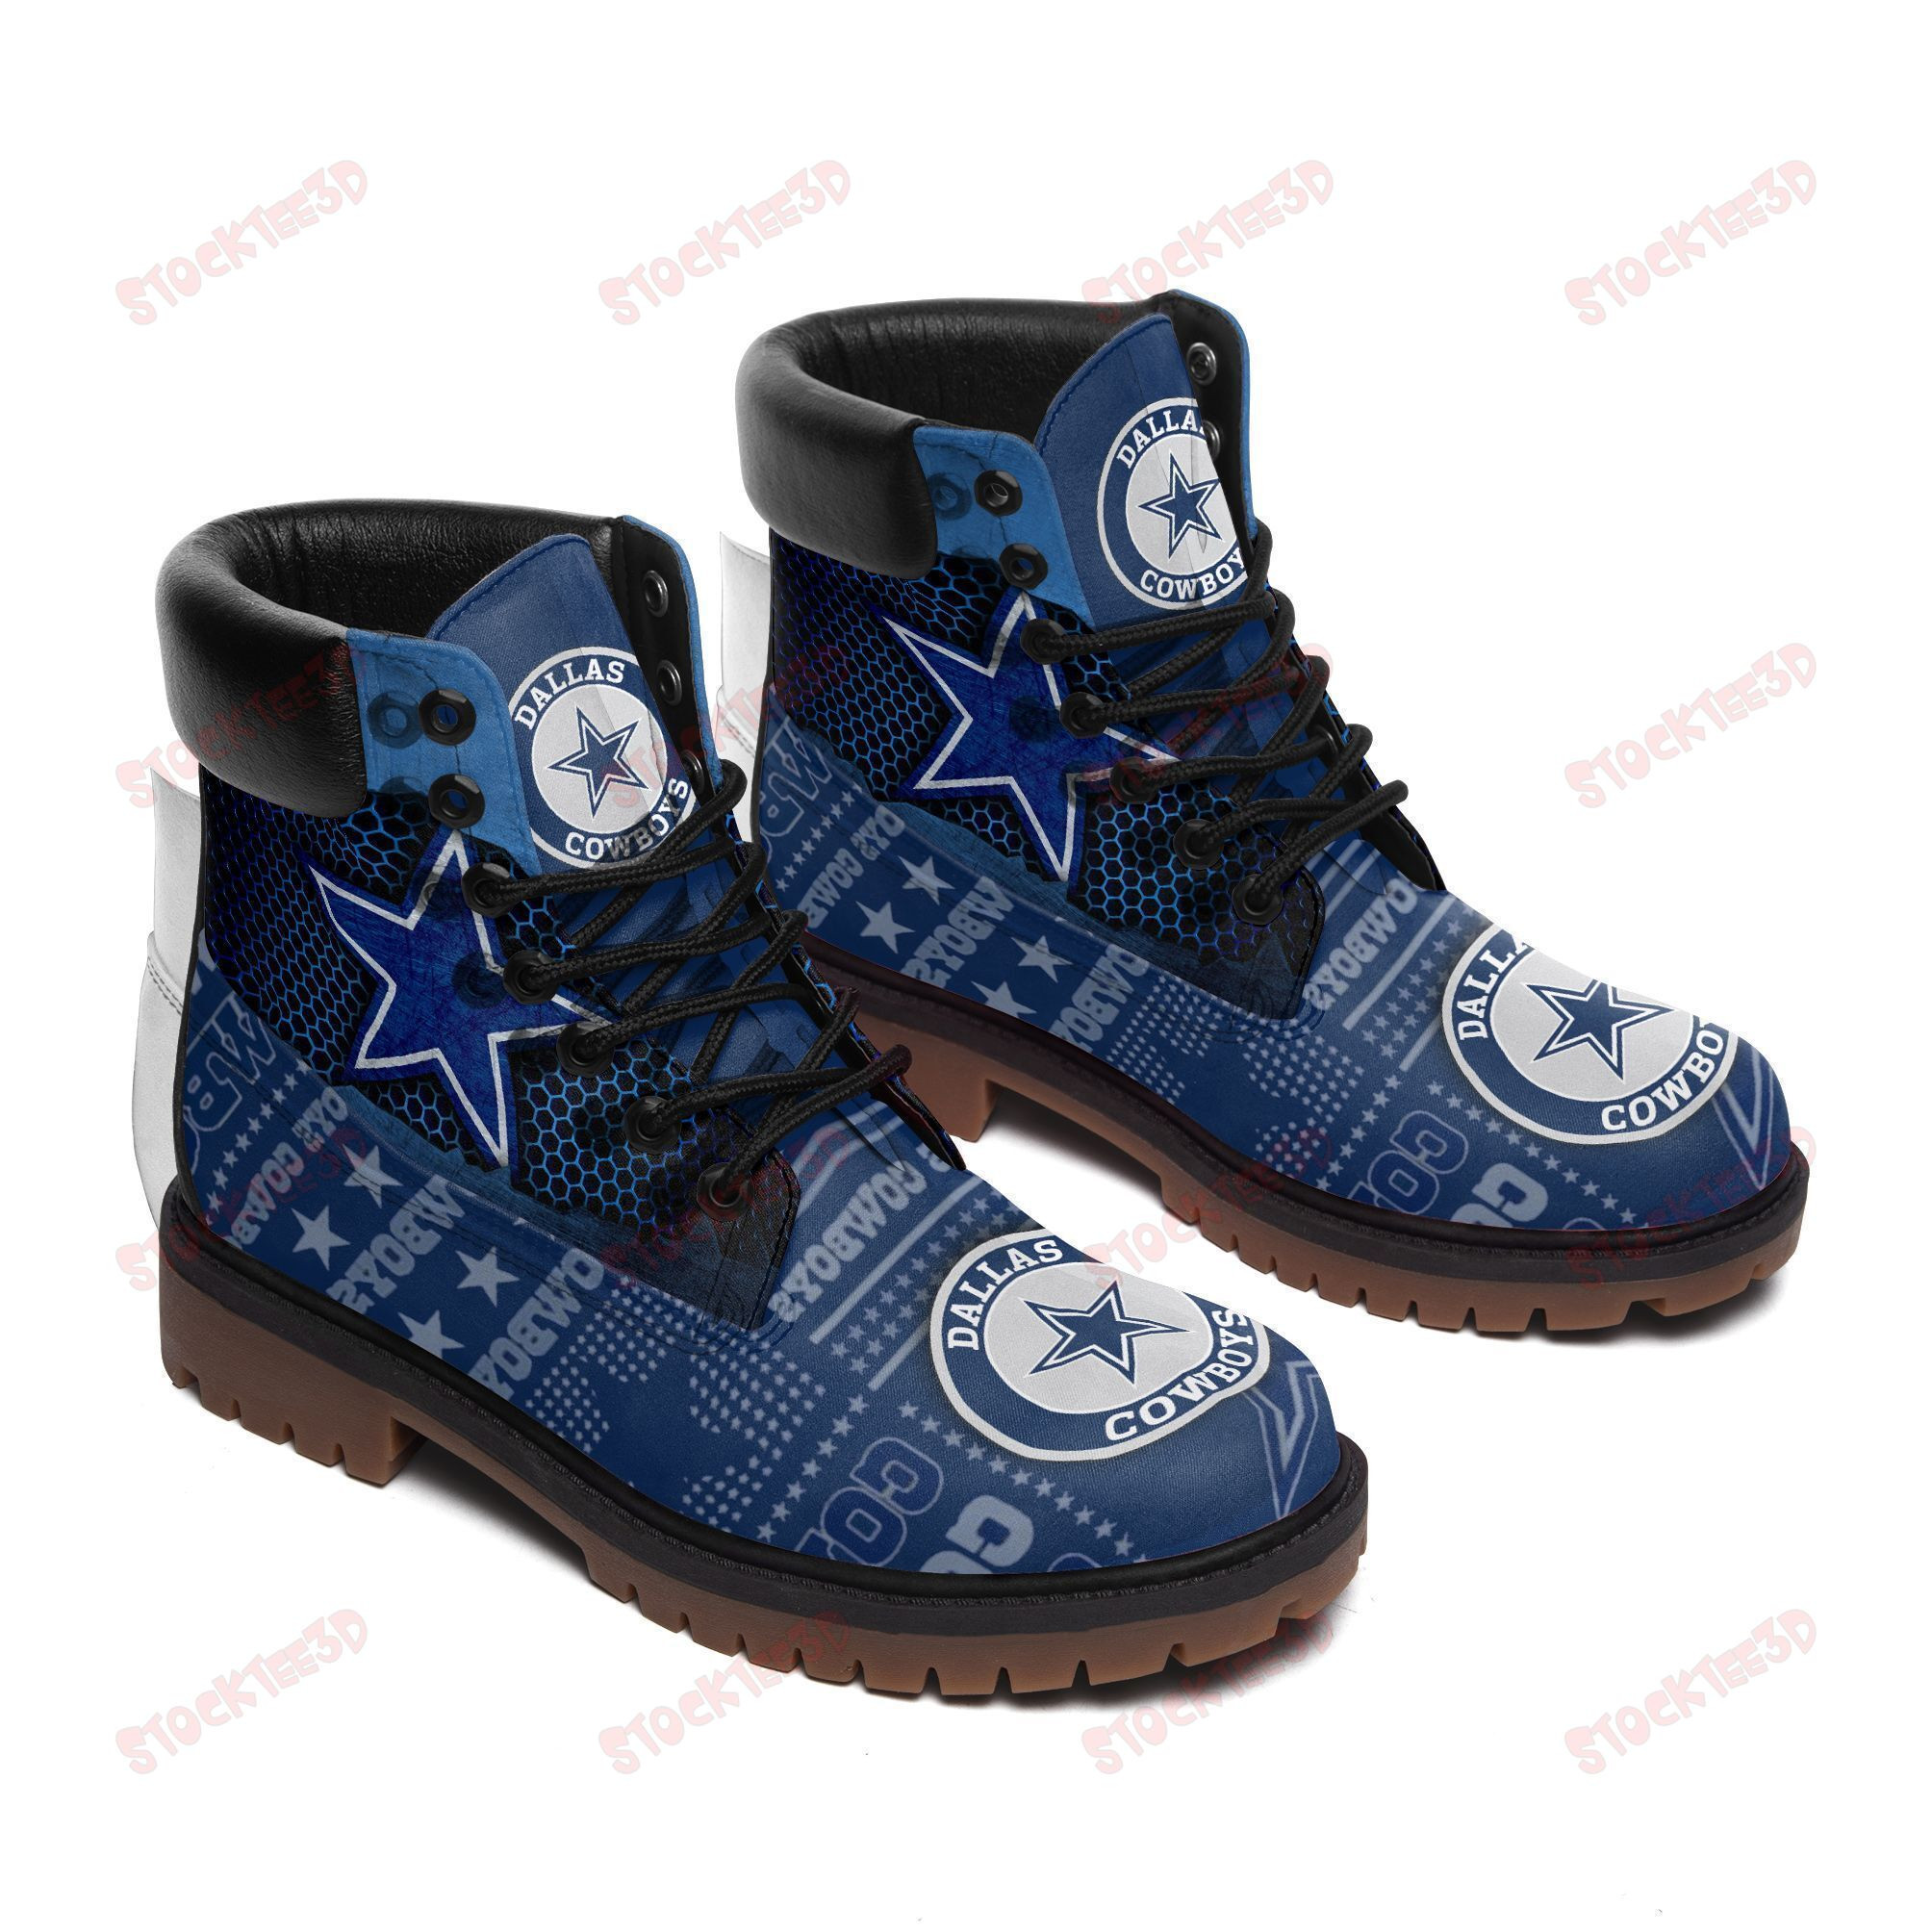 Dallas Cowboys Boots - Premium Shoes/ Premium Leather Boots - Gift For Sports Lovers 090